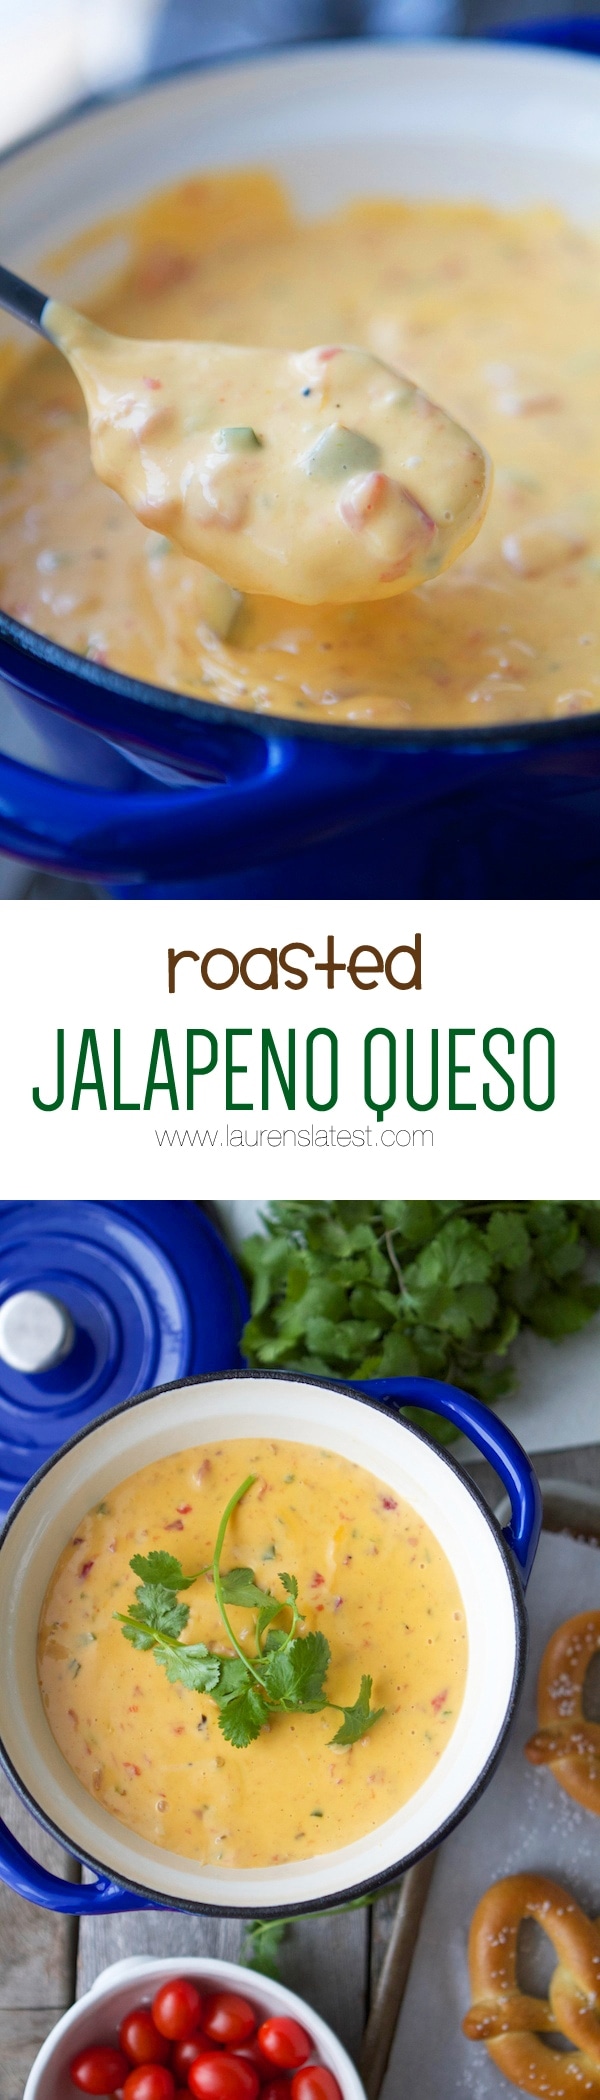 ROASTED JALAPENO QUESO